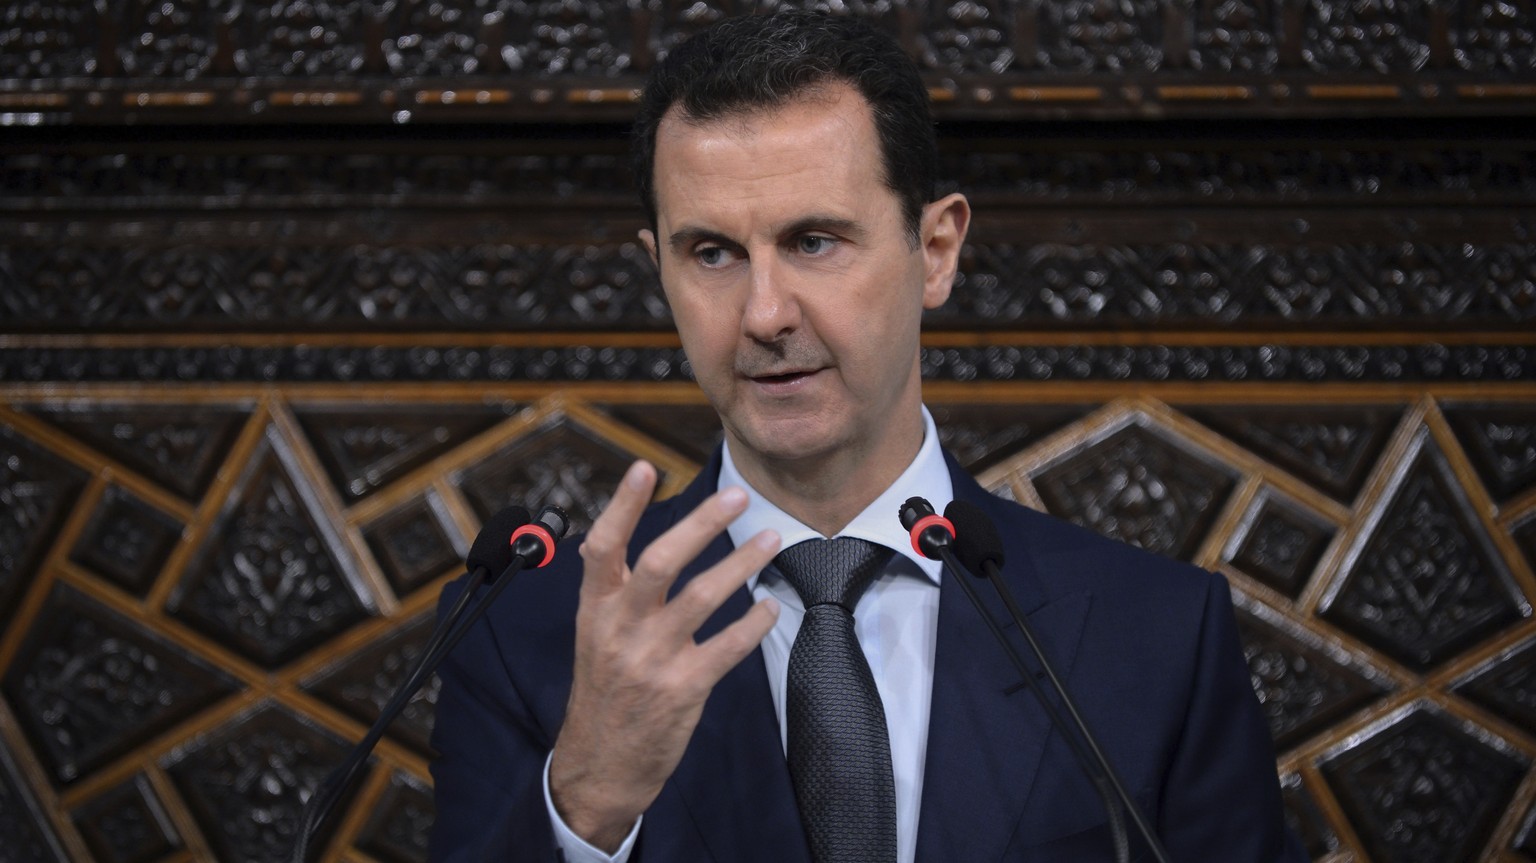 FILE - In this June 7, 2016 file photo released by the Syrian official news agency SANA, Syrian President Bashar Assad, addresses a speech to the newly-elected parliament at the parliament building, i ...